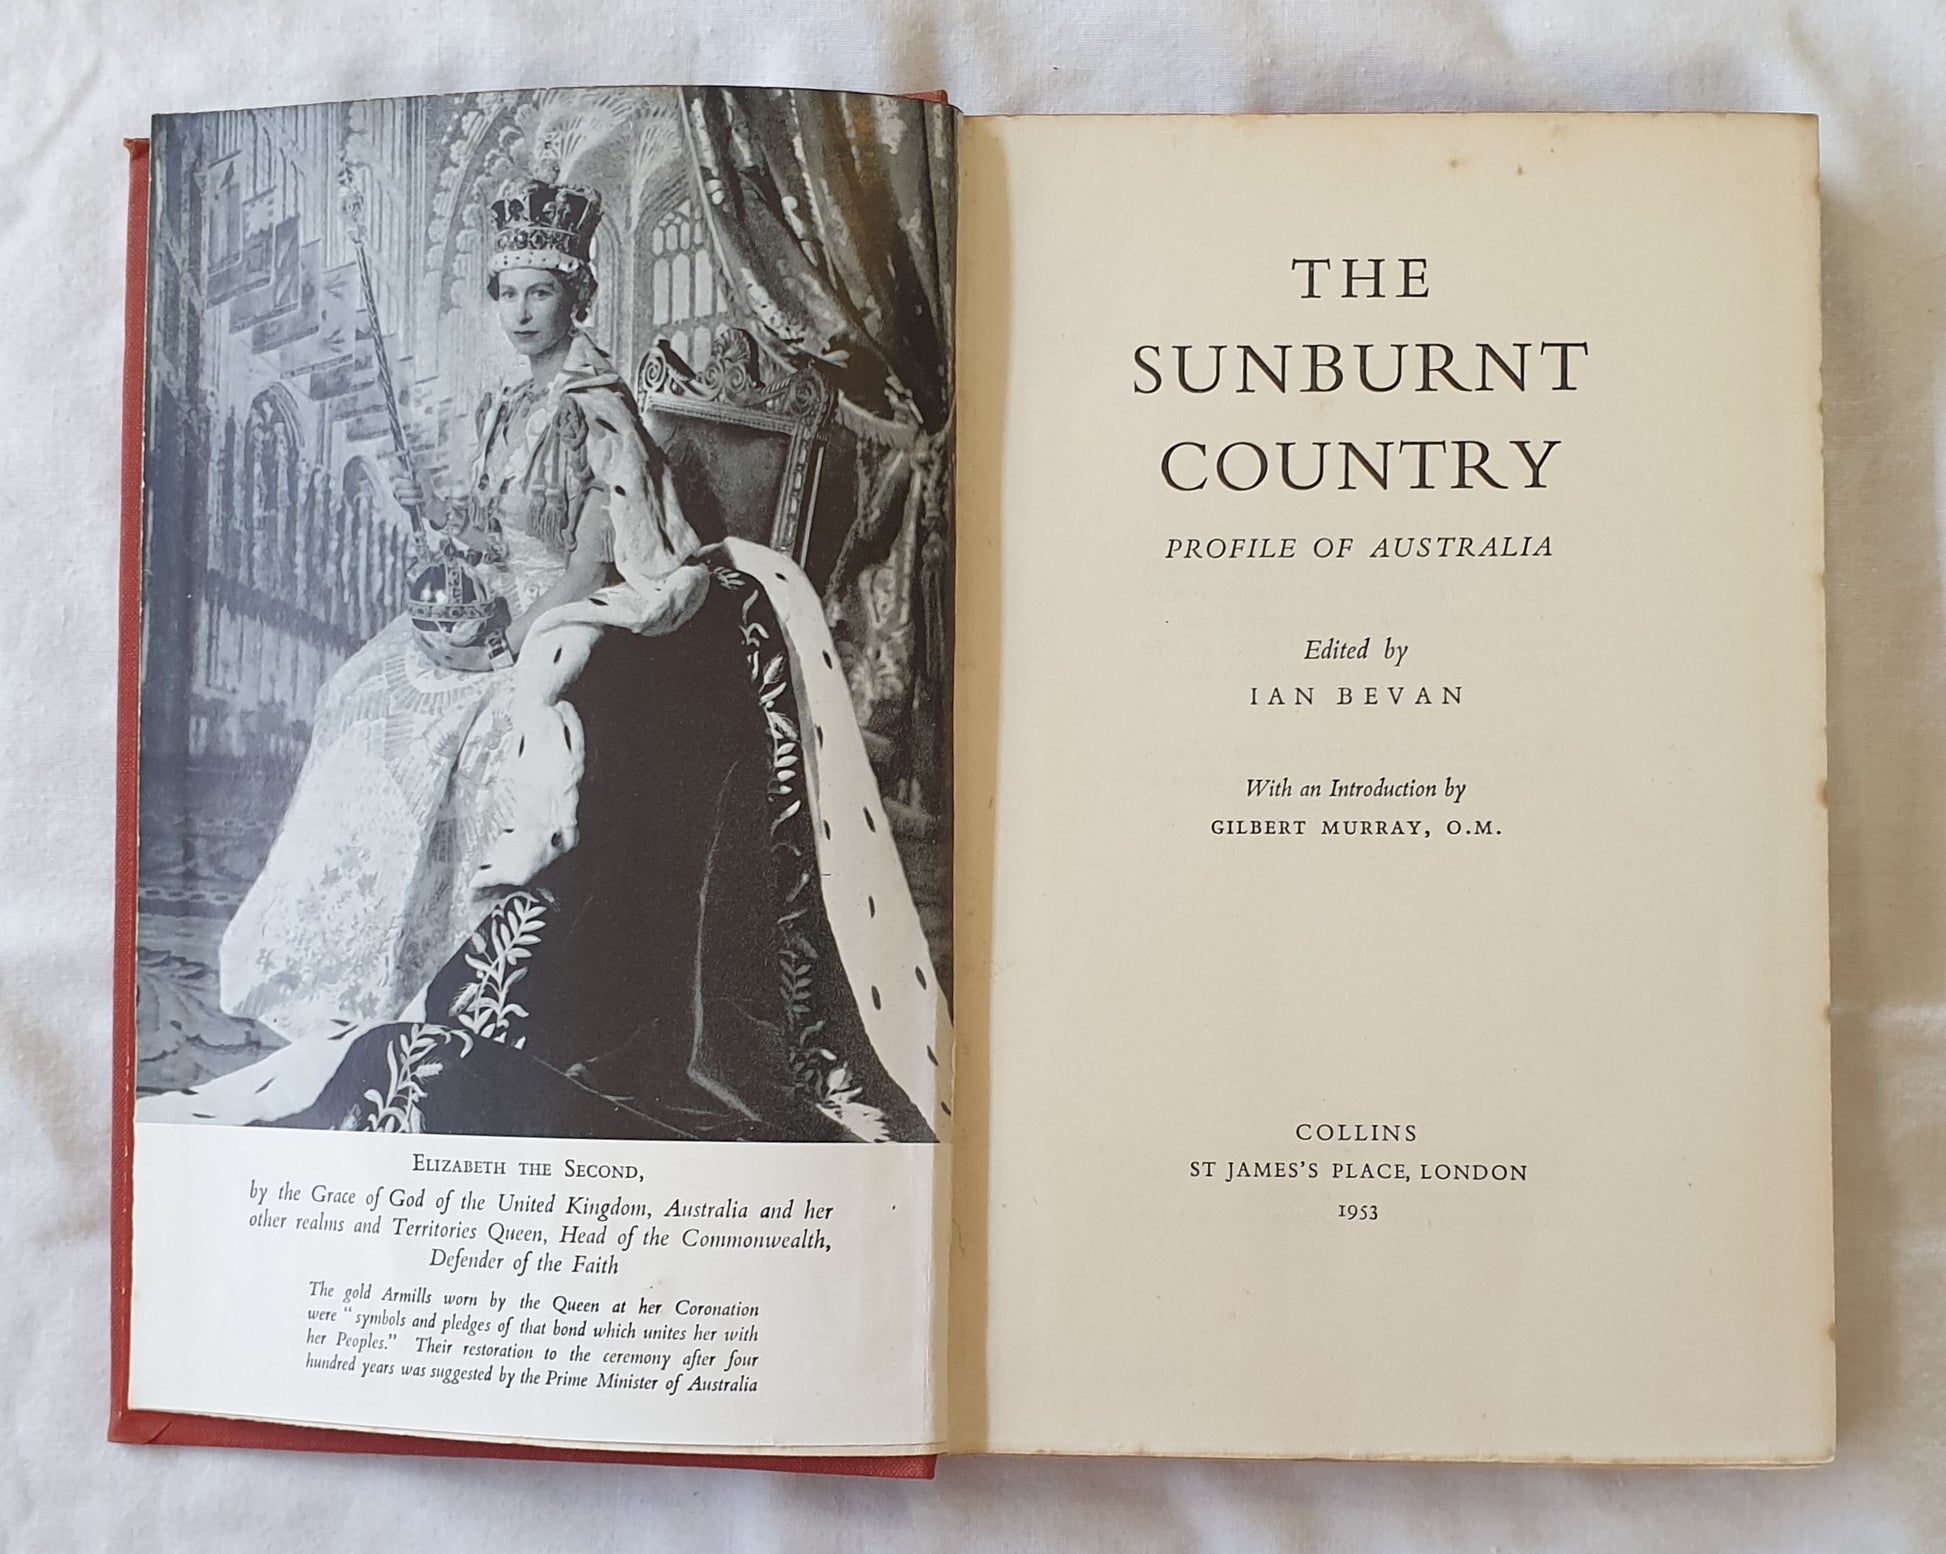 The Sunburnt Country Edited by Ian Bevan